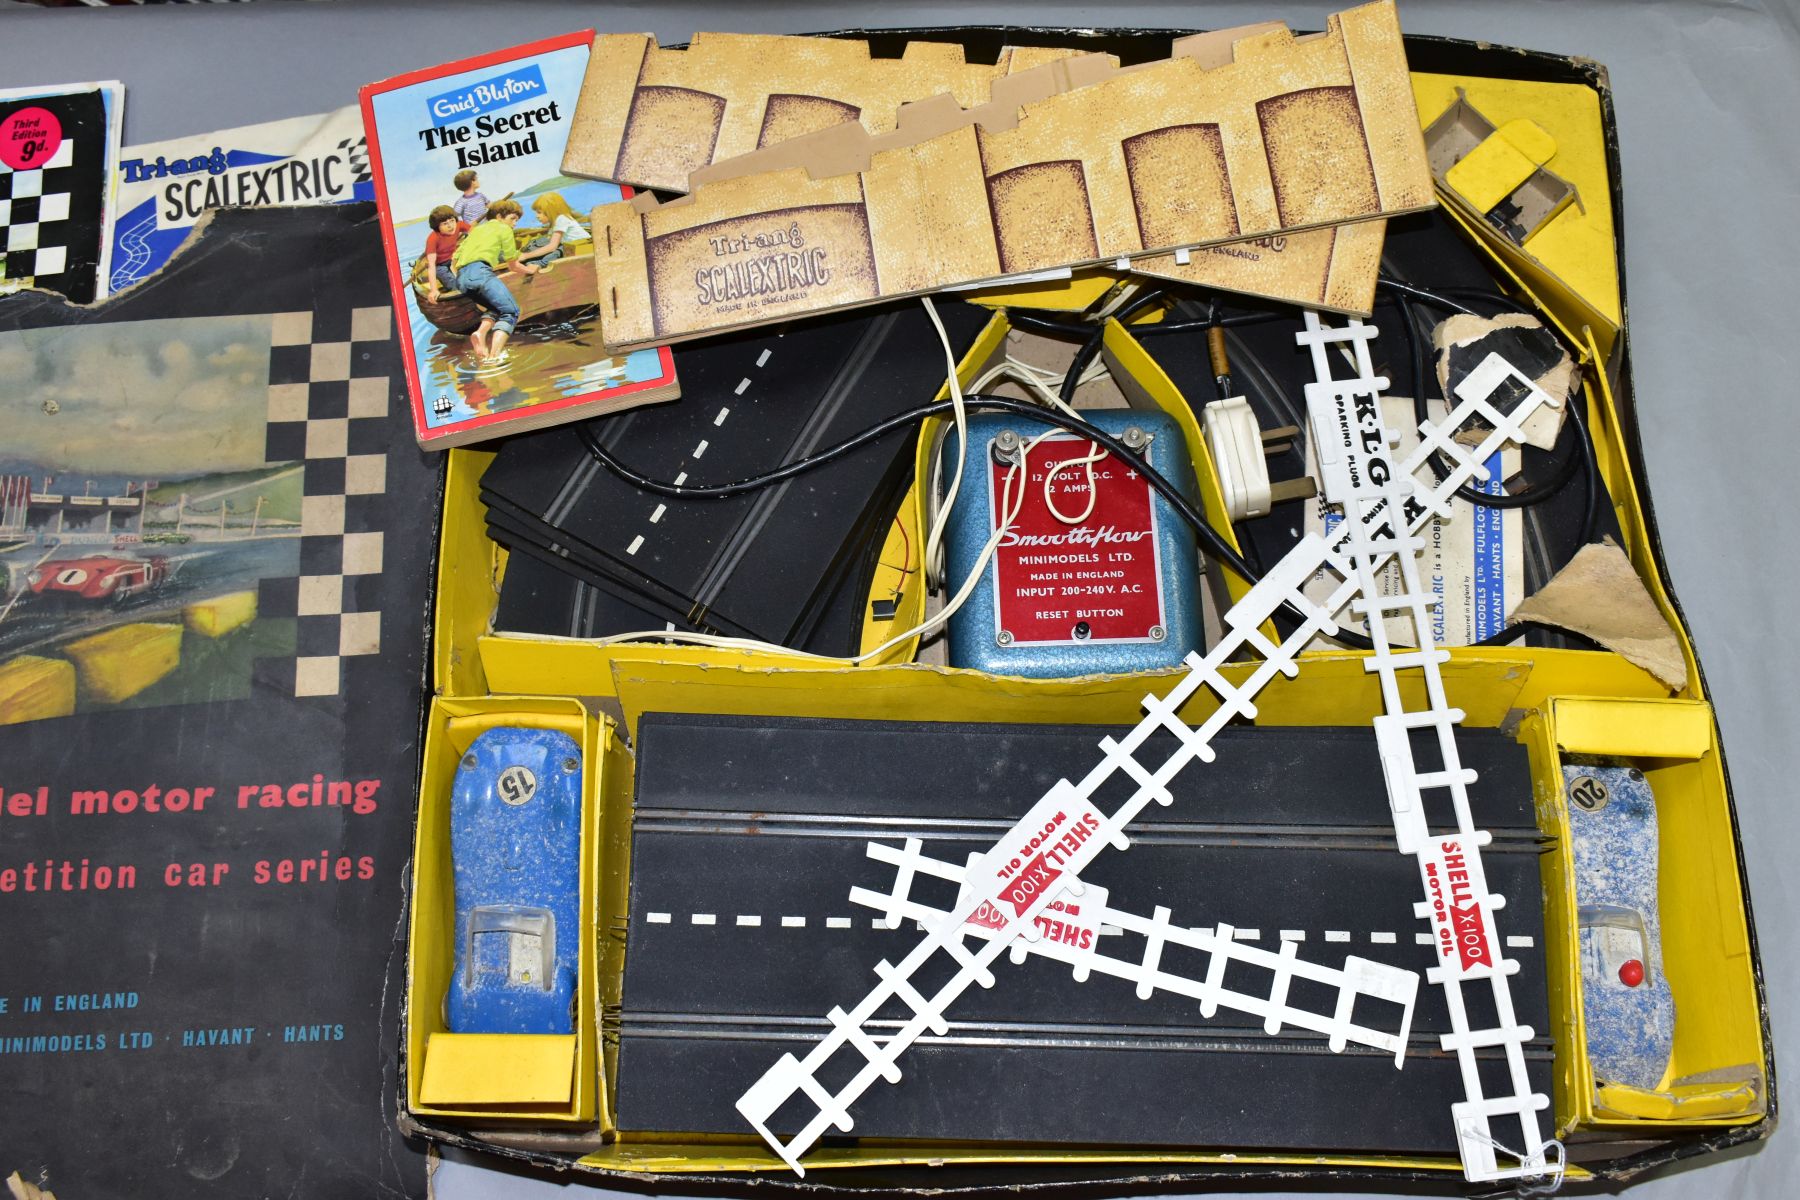 A BOXED SCALEXTRIC COMPETITION CAR SERIES, No CM1?, contents not checked but appears largely - Image 2 of 4